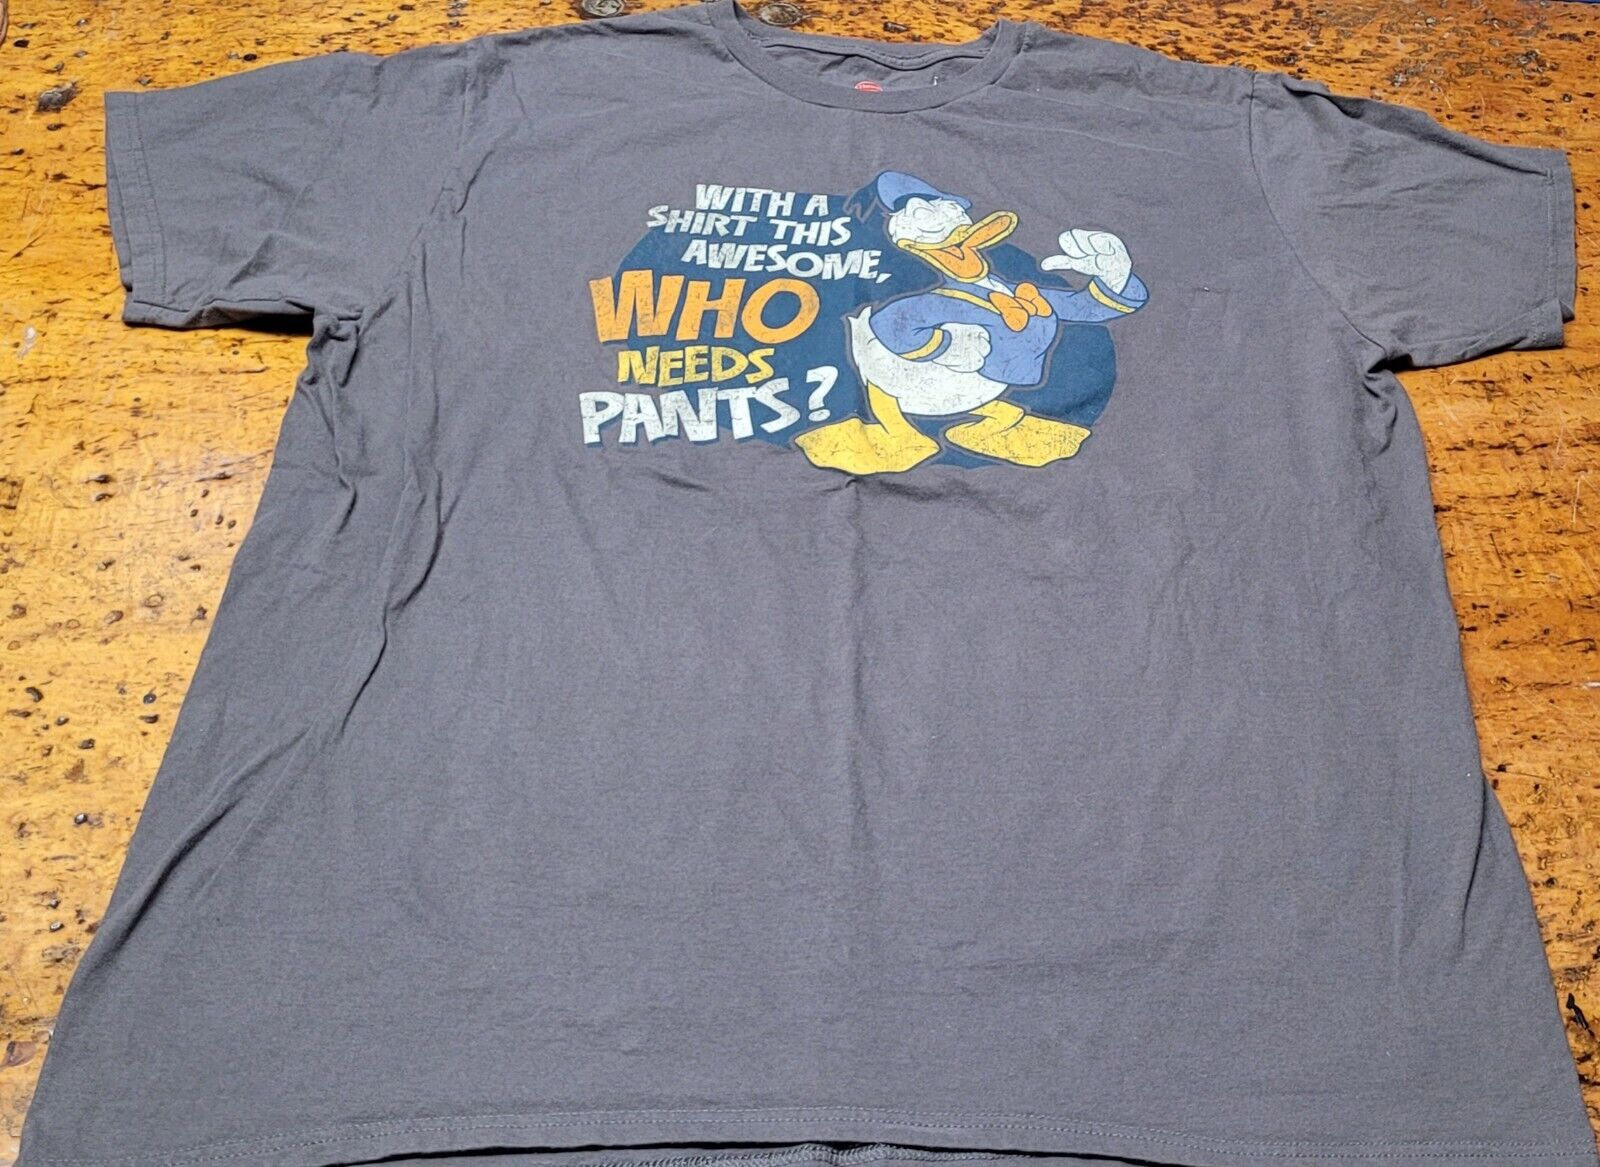 Disney Donald Duck Adult 2XL T Shirt “With a Shirt This Awesome Who Needs Pants”